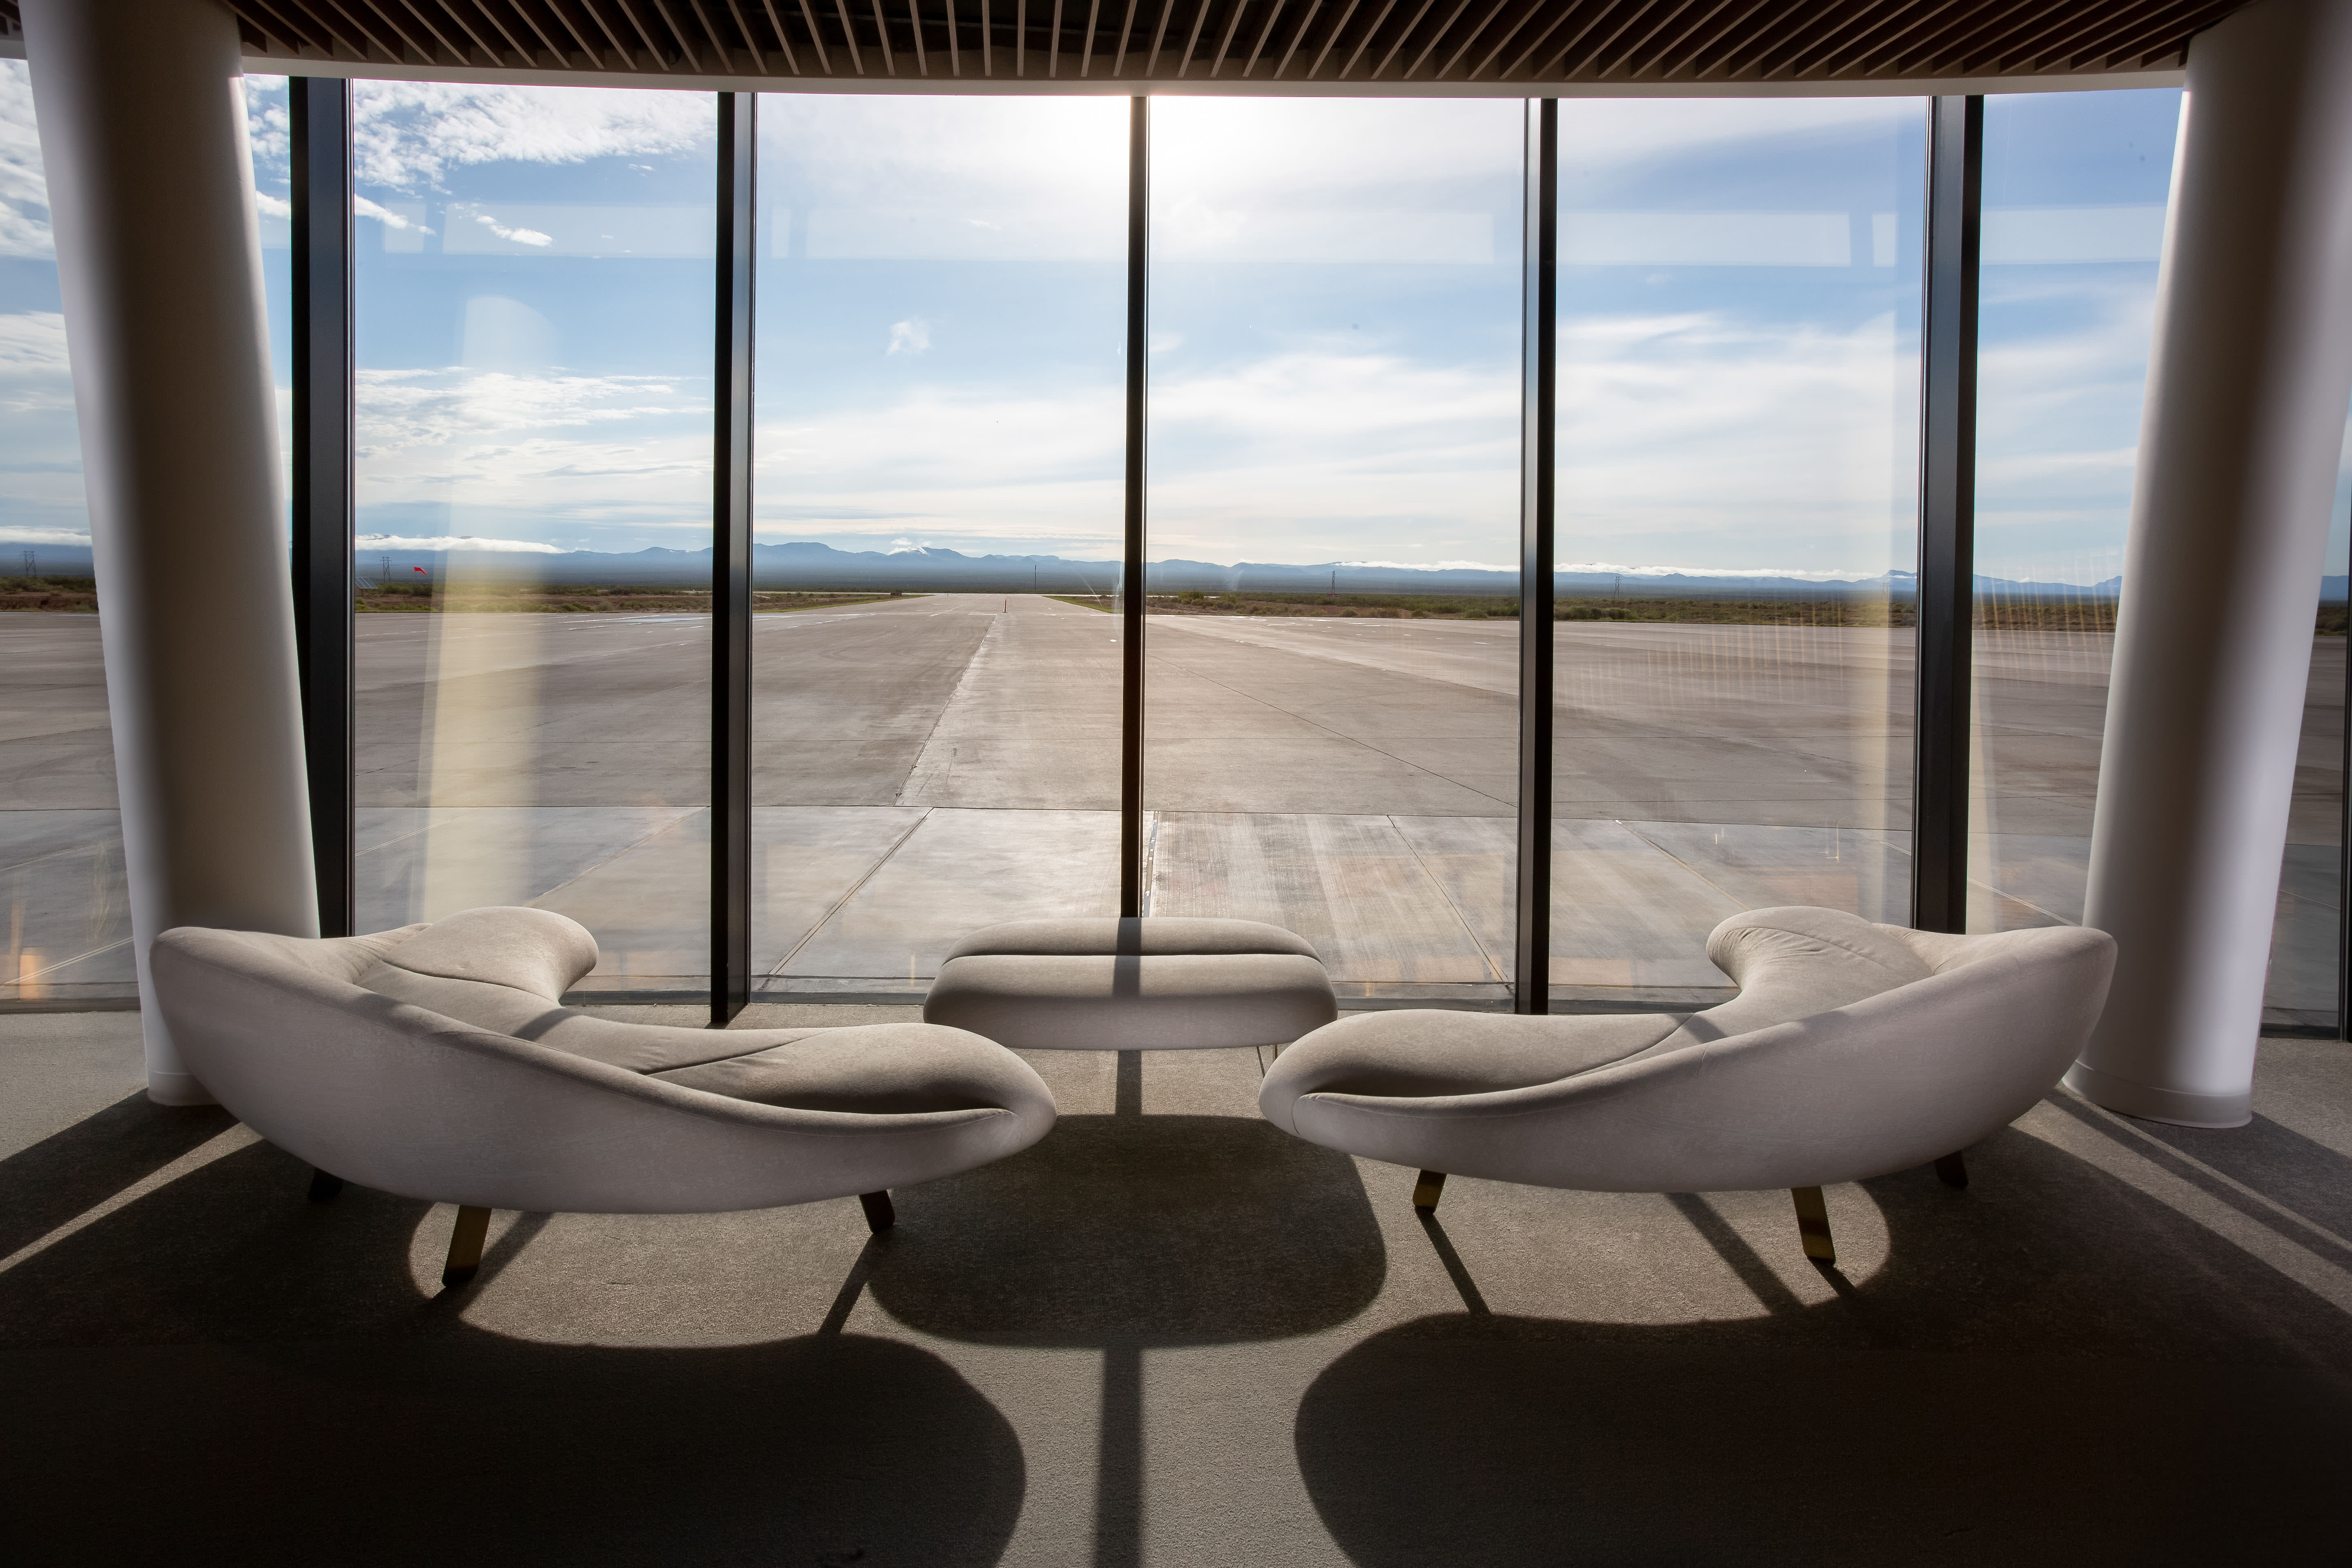 A view out of the window from Virgin Galactic's spaceport